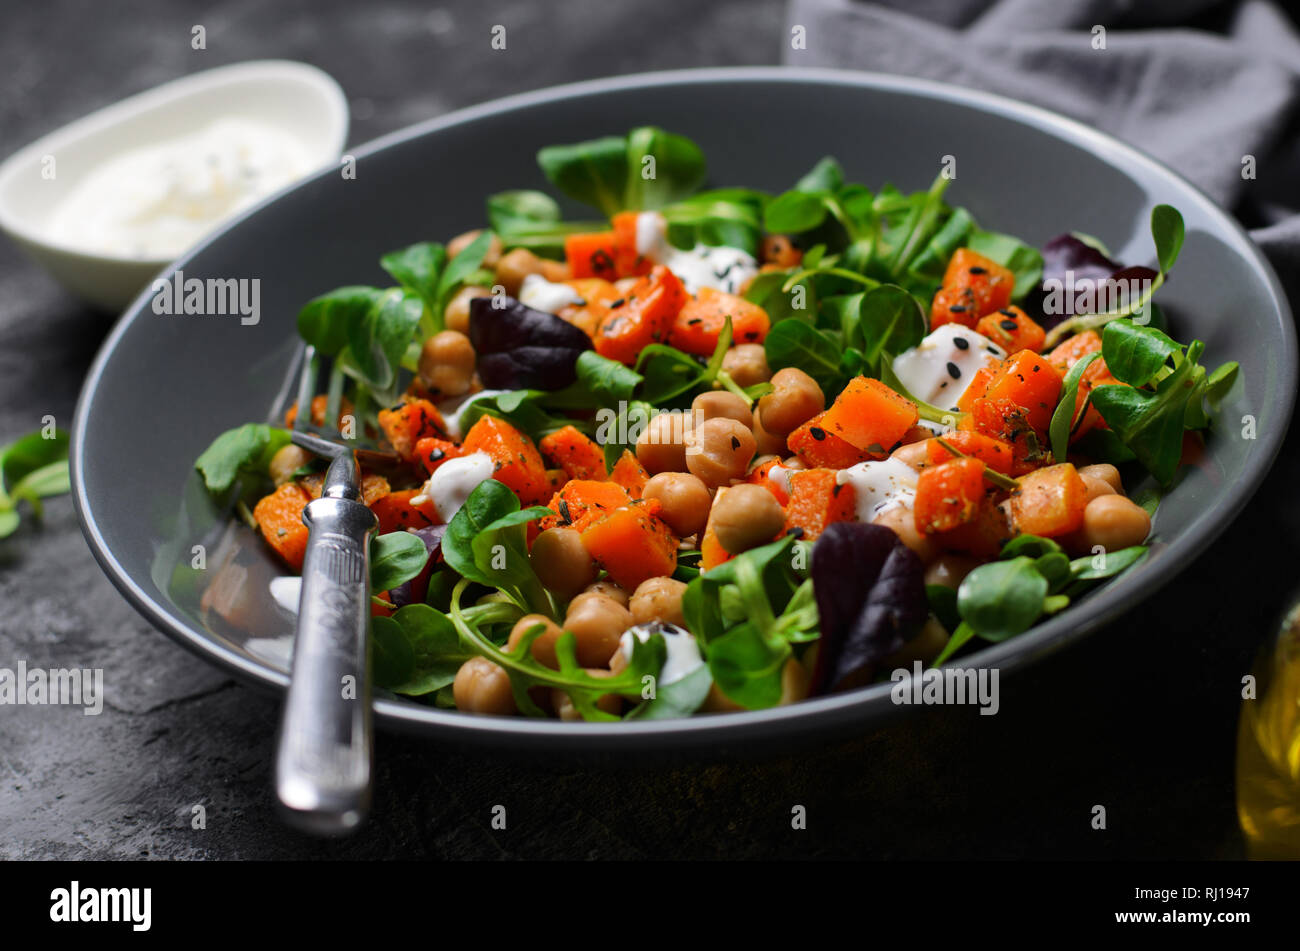 Healthy Vegetarian Salad, Roasted Pumpkin and Chickpea Salad in a Bowl on Grey Background Stock Photo